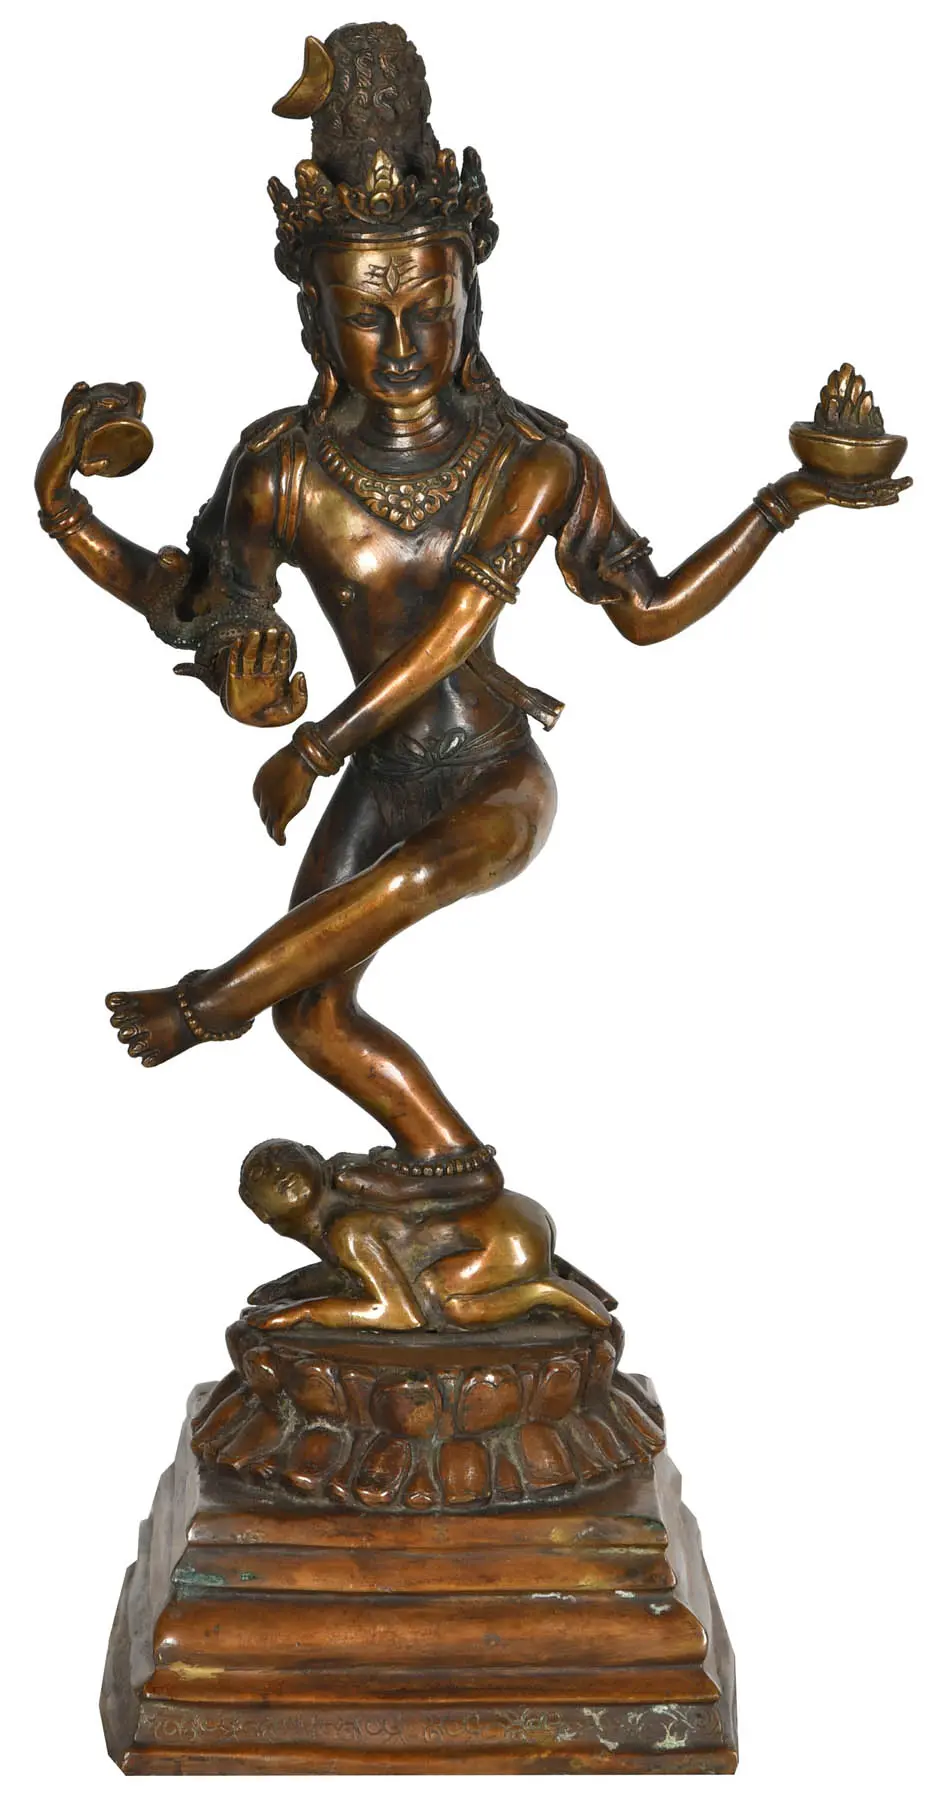 Metallic Golden-Look 8.5 Inches Tall Sculpture Ethnic Home Decor/Religious from Nepal Lord Shiva Statue/Brass Nataraja Idol